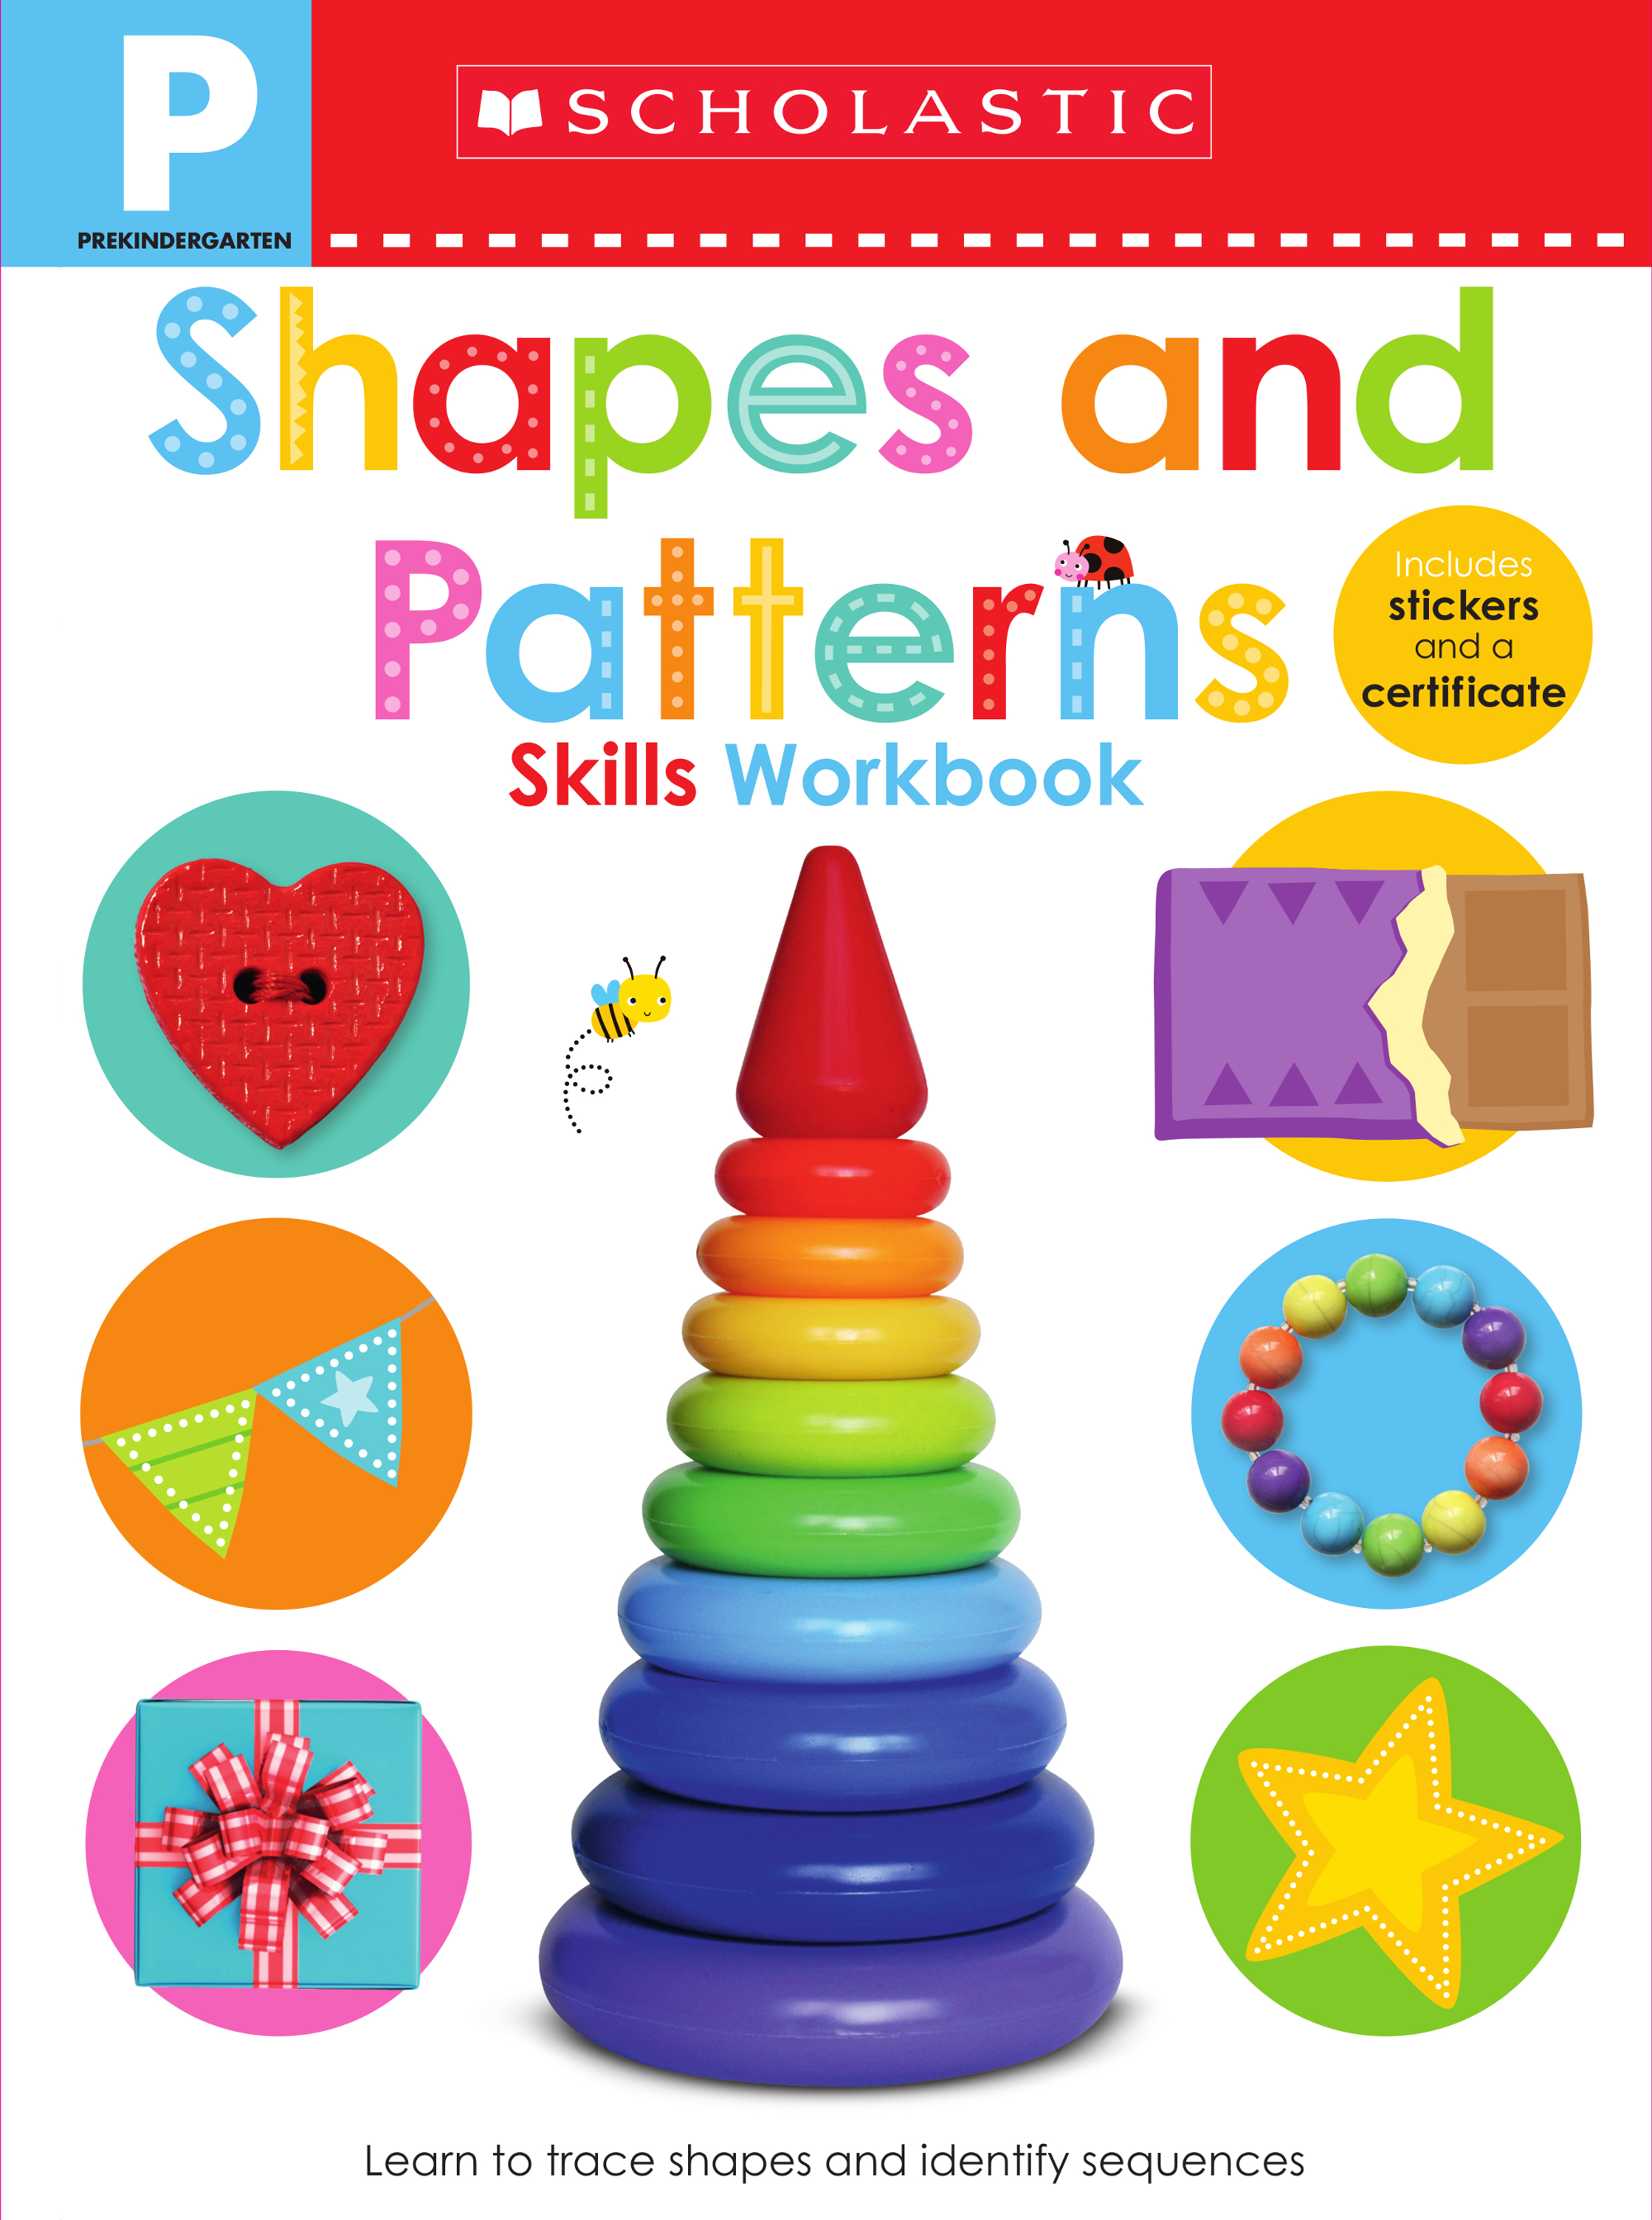 Scholastic Early Learners: Pre-K Skills Workbook: Shapes And Patterns 英文原版 进口故事书